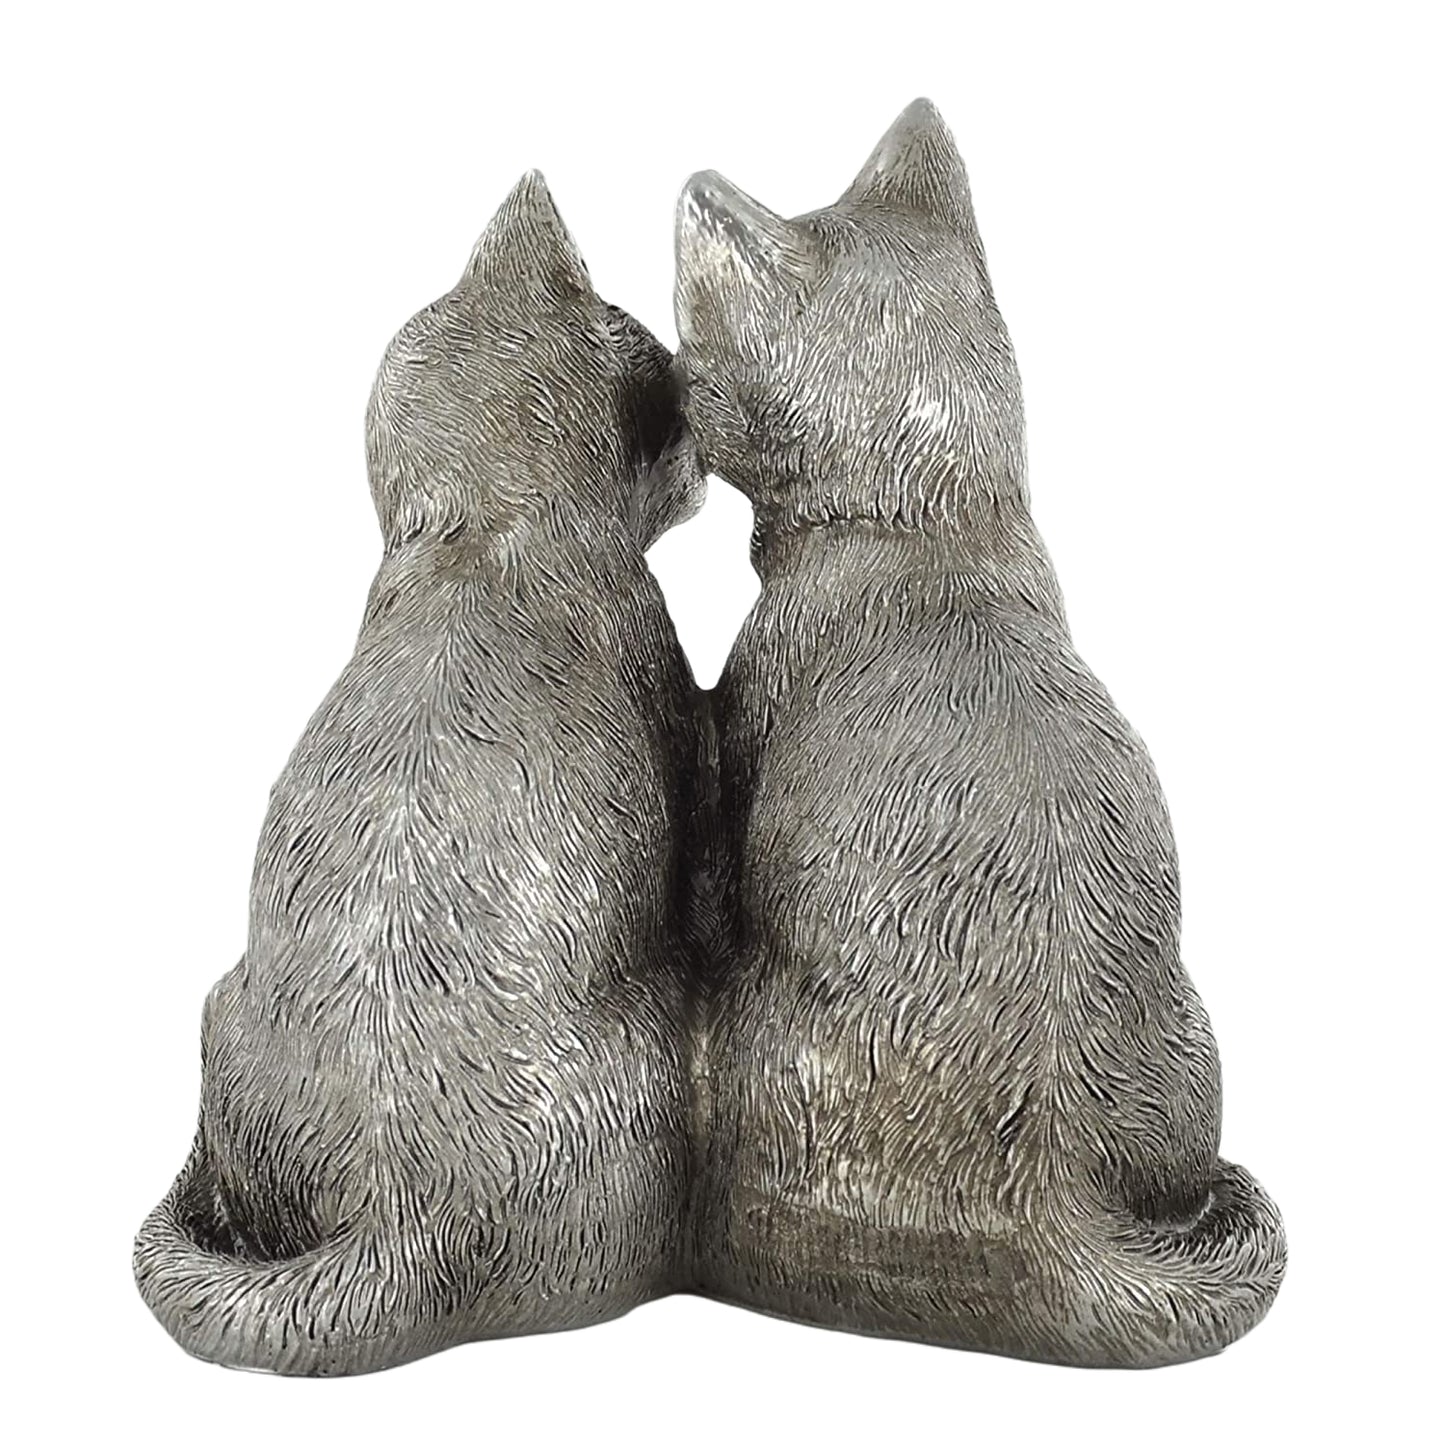 Pair Of Cats In Antique Silver Finish